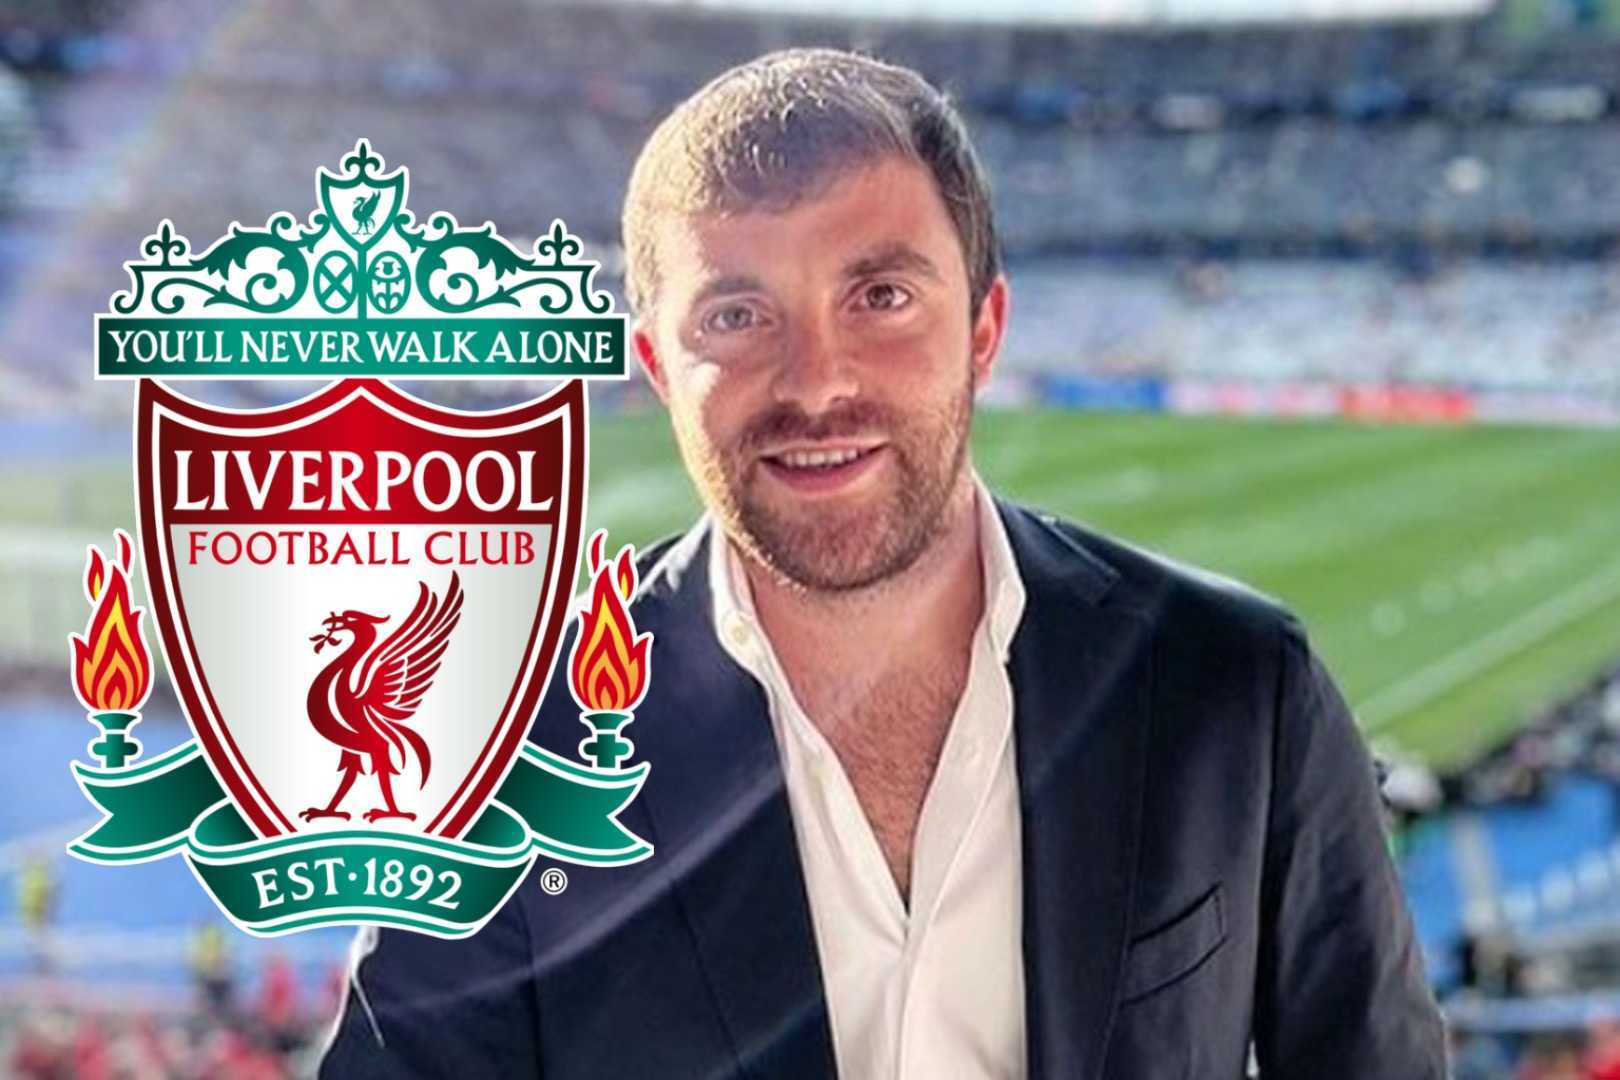 Fabrizio Romano drops bombshell morning update for Liverpool fans